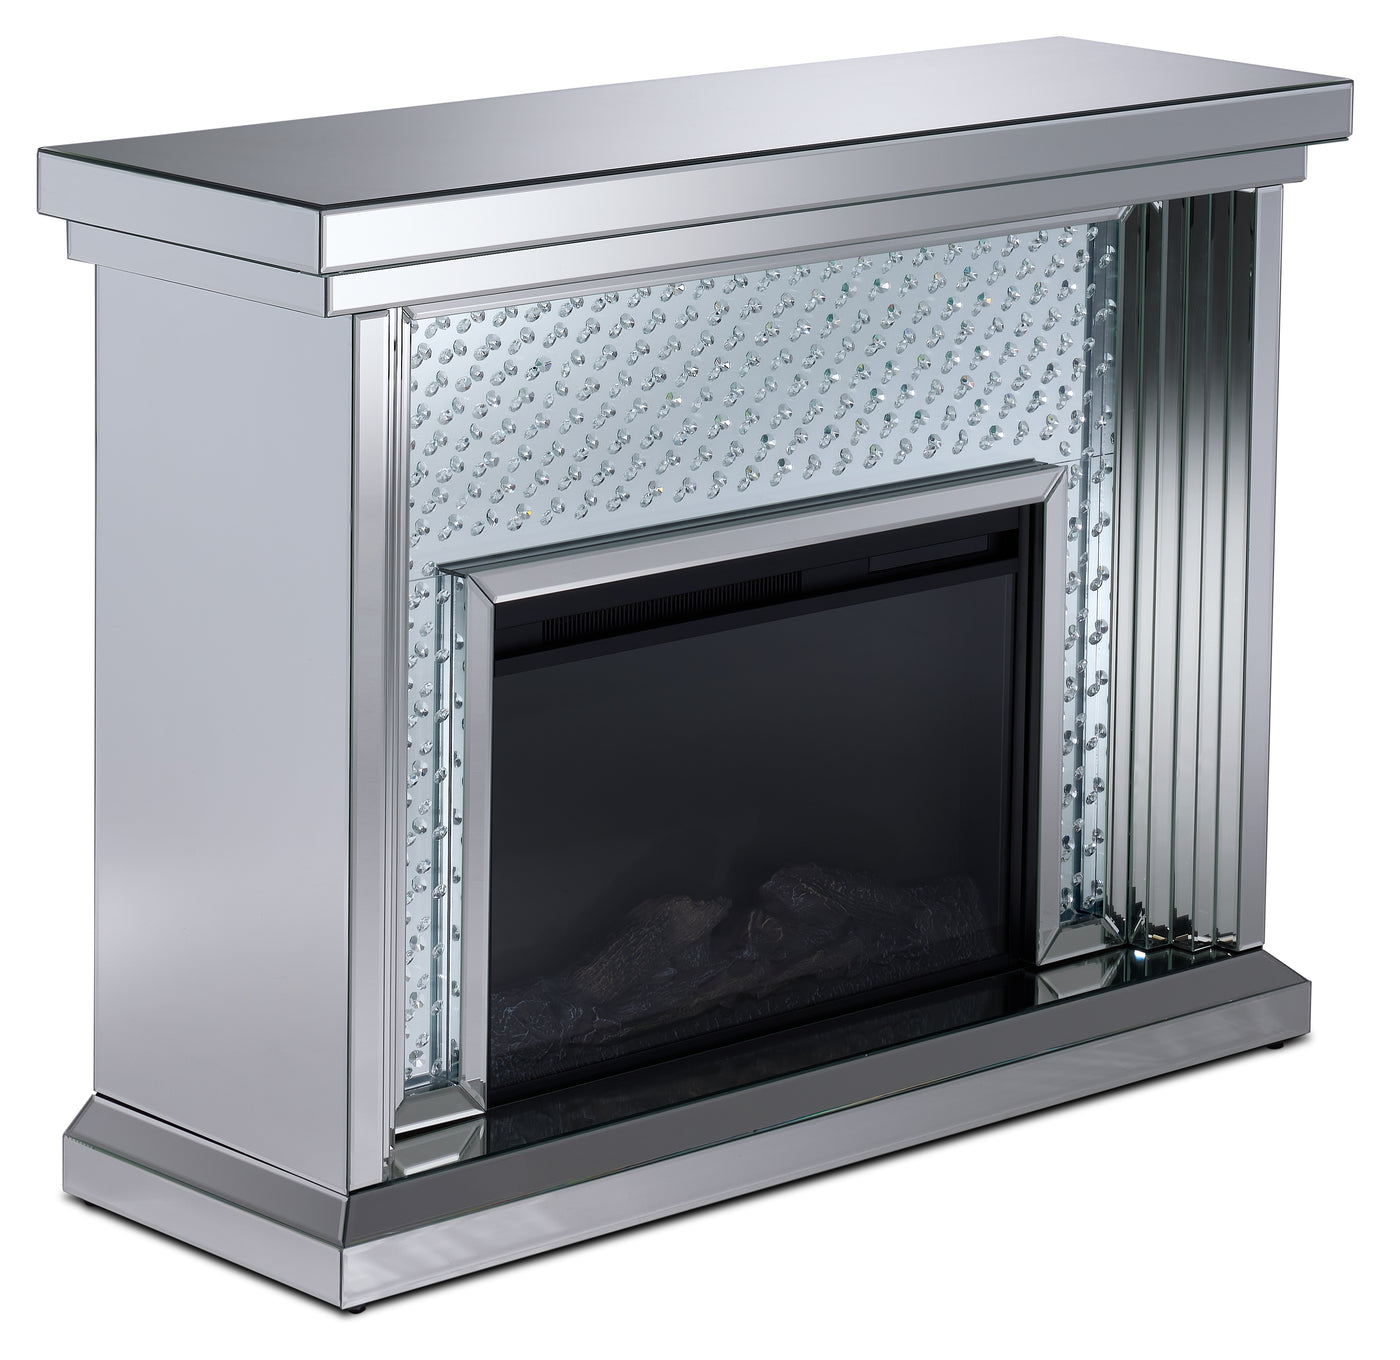 Miami Fireplace with Log Insert - Mirrored Glass